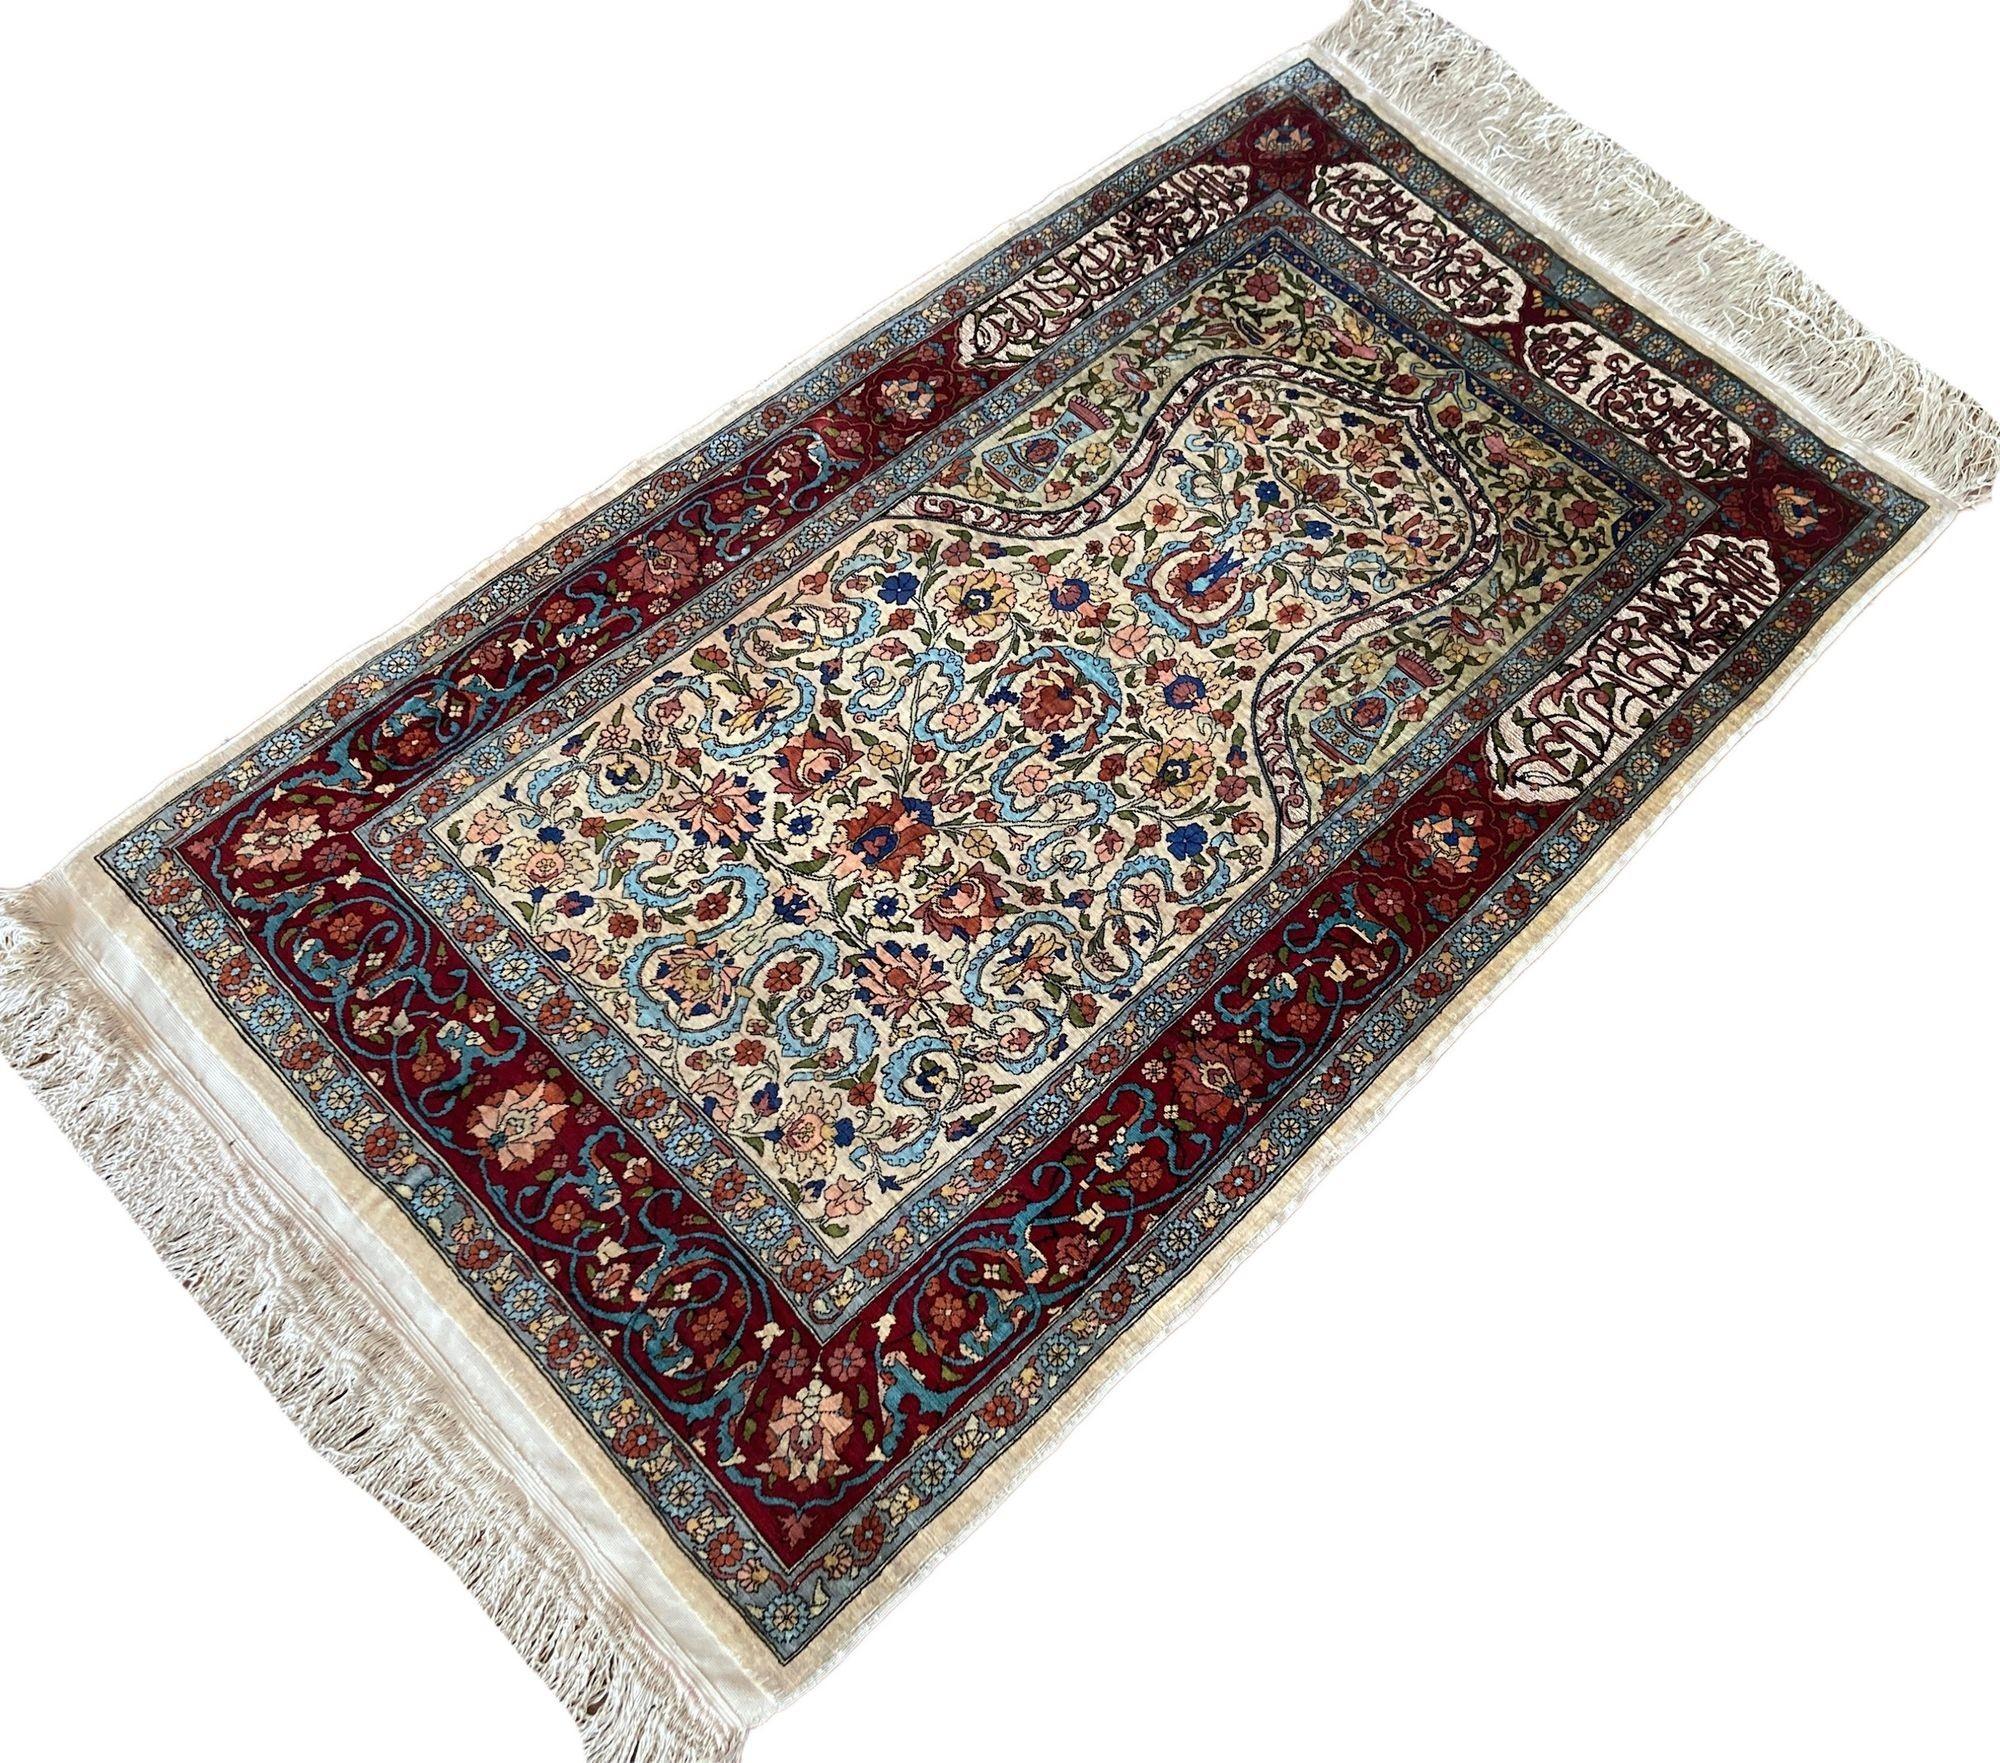 Vintage Turkish Silk Hereke Rug 1.25m x 0.75m In Good Condition For Sale In St. Albans, GB